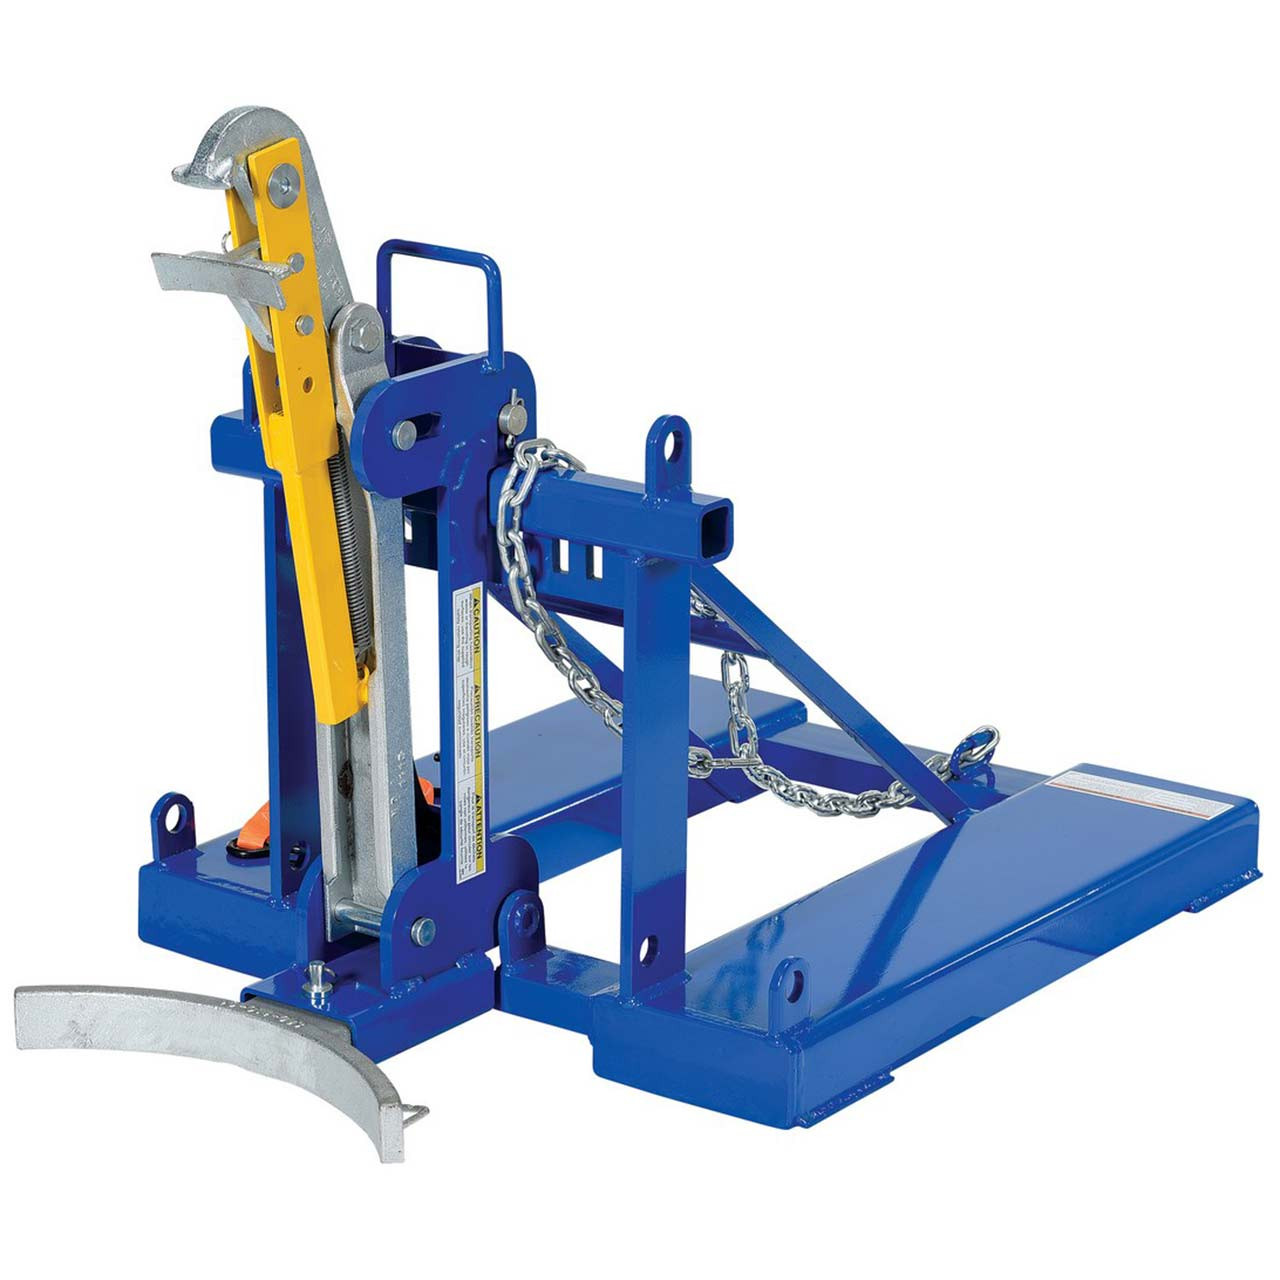 Automatic Drum Lifter